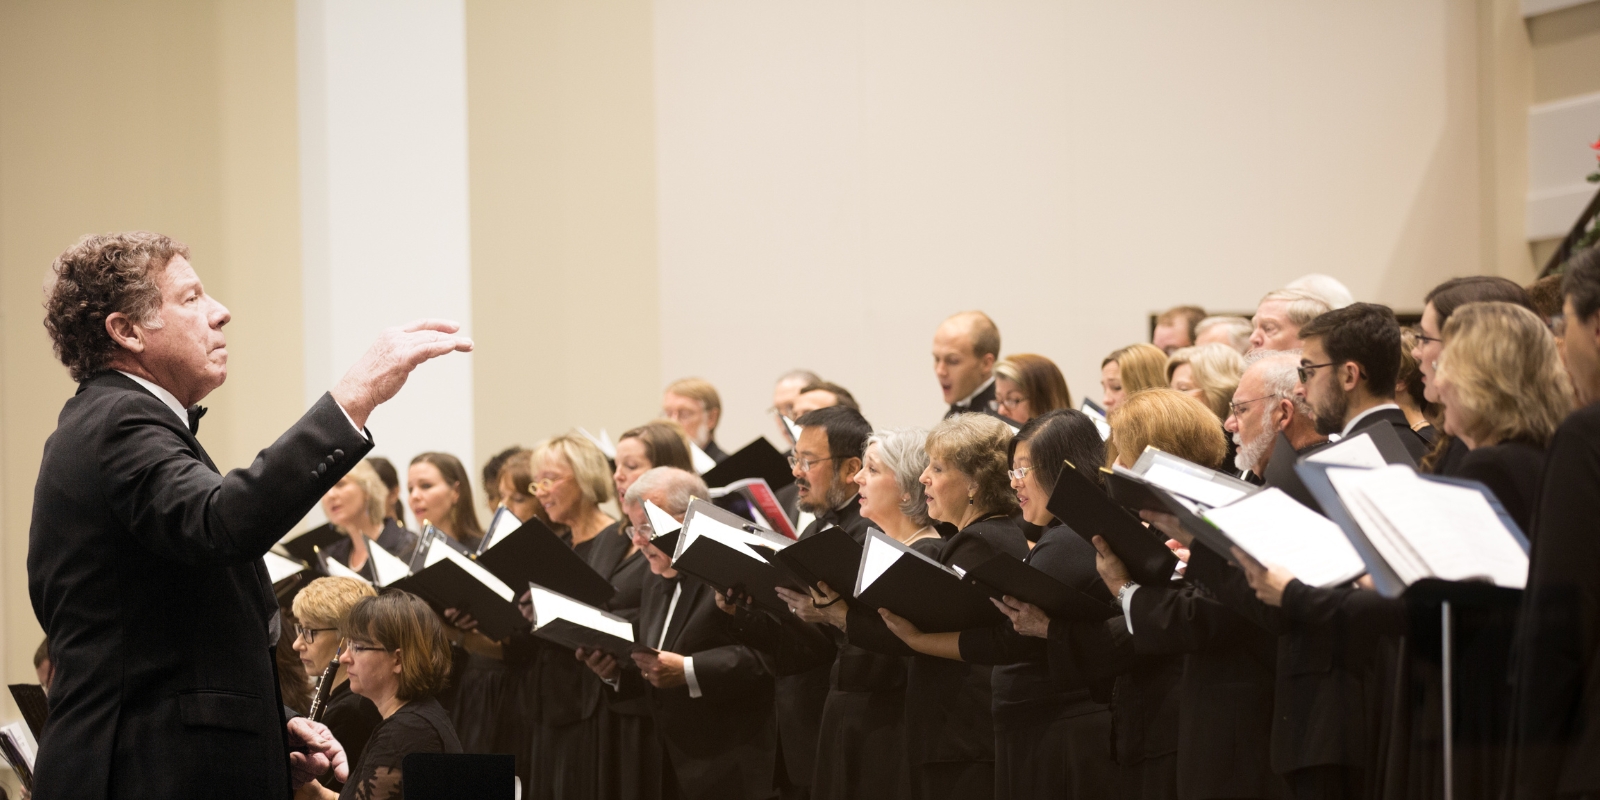 Athens Master Chorale: Sanctus, Settings From Great Composers